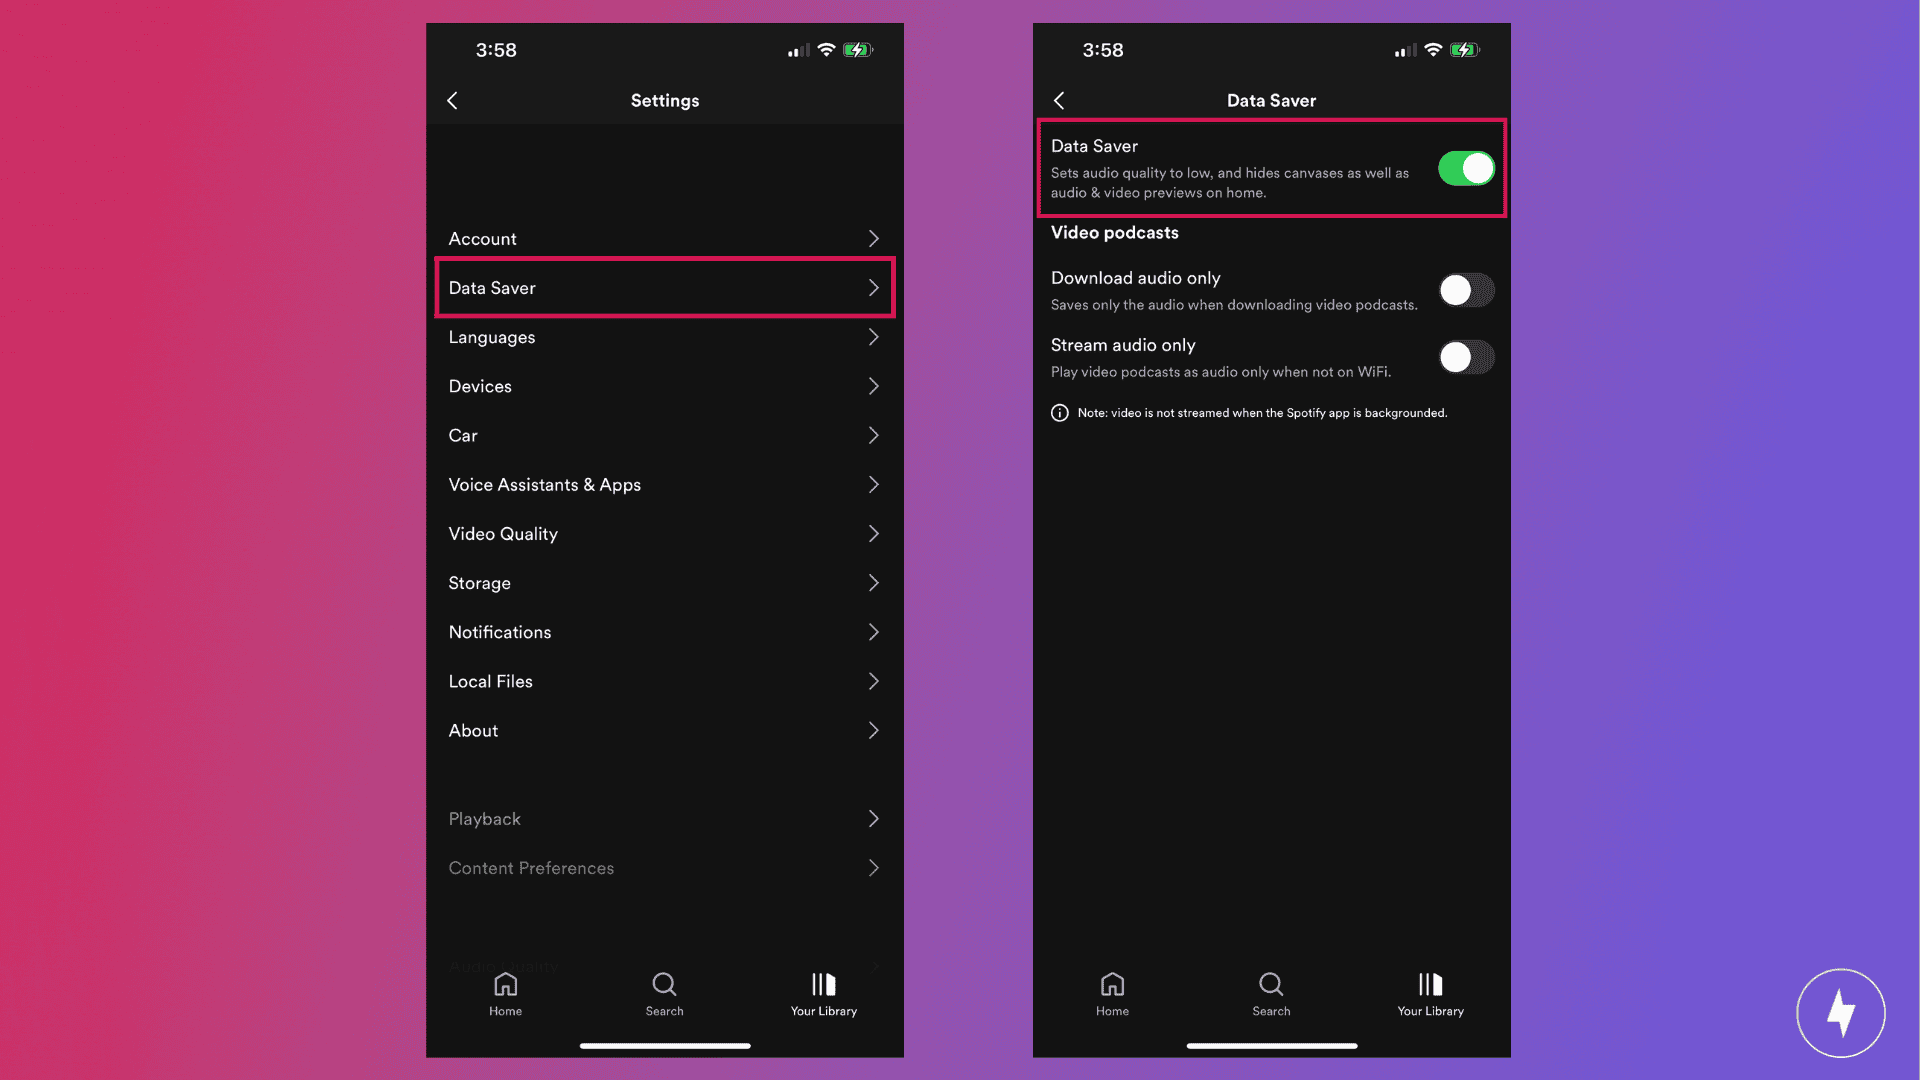 Spotify “Data Saver” mode settings on iPhone